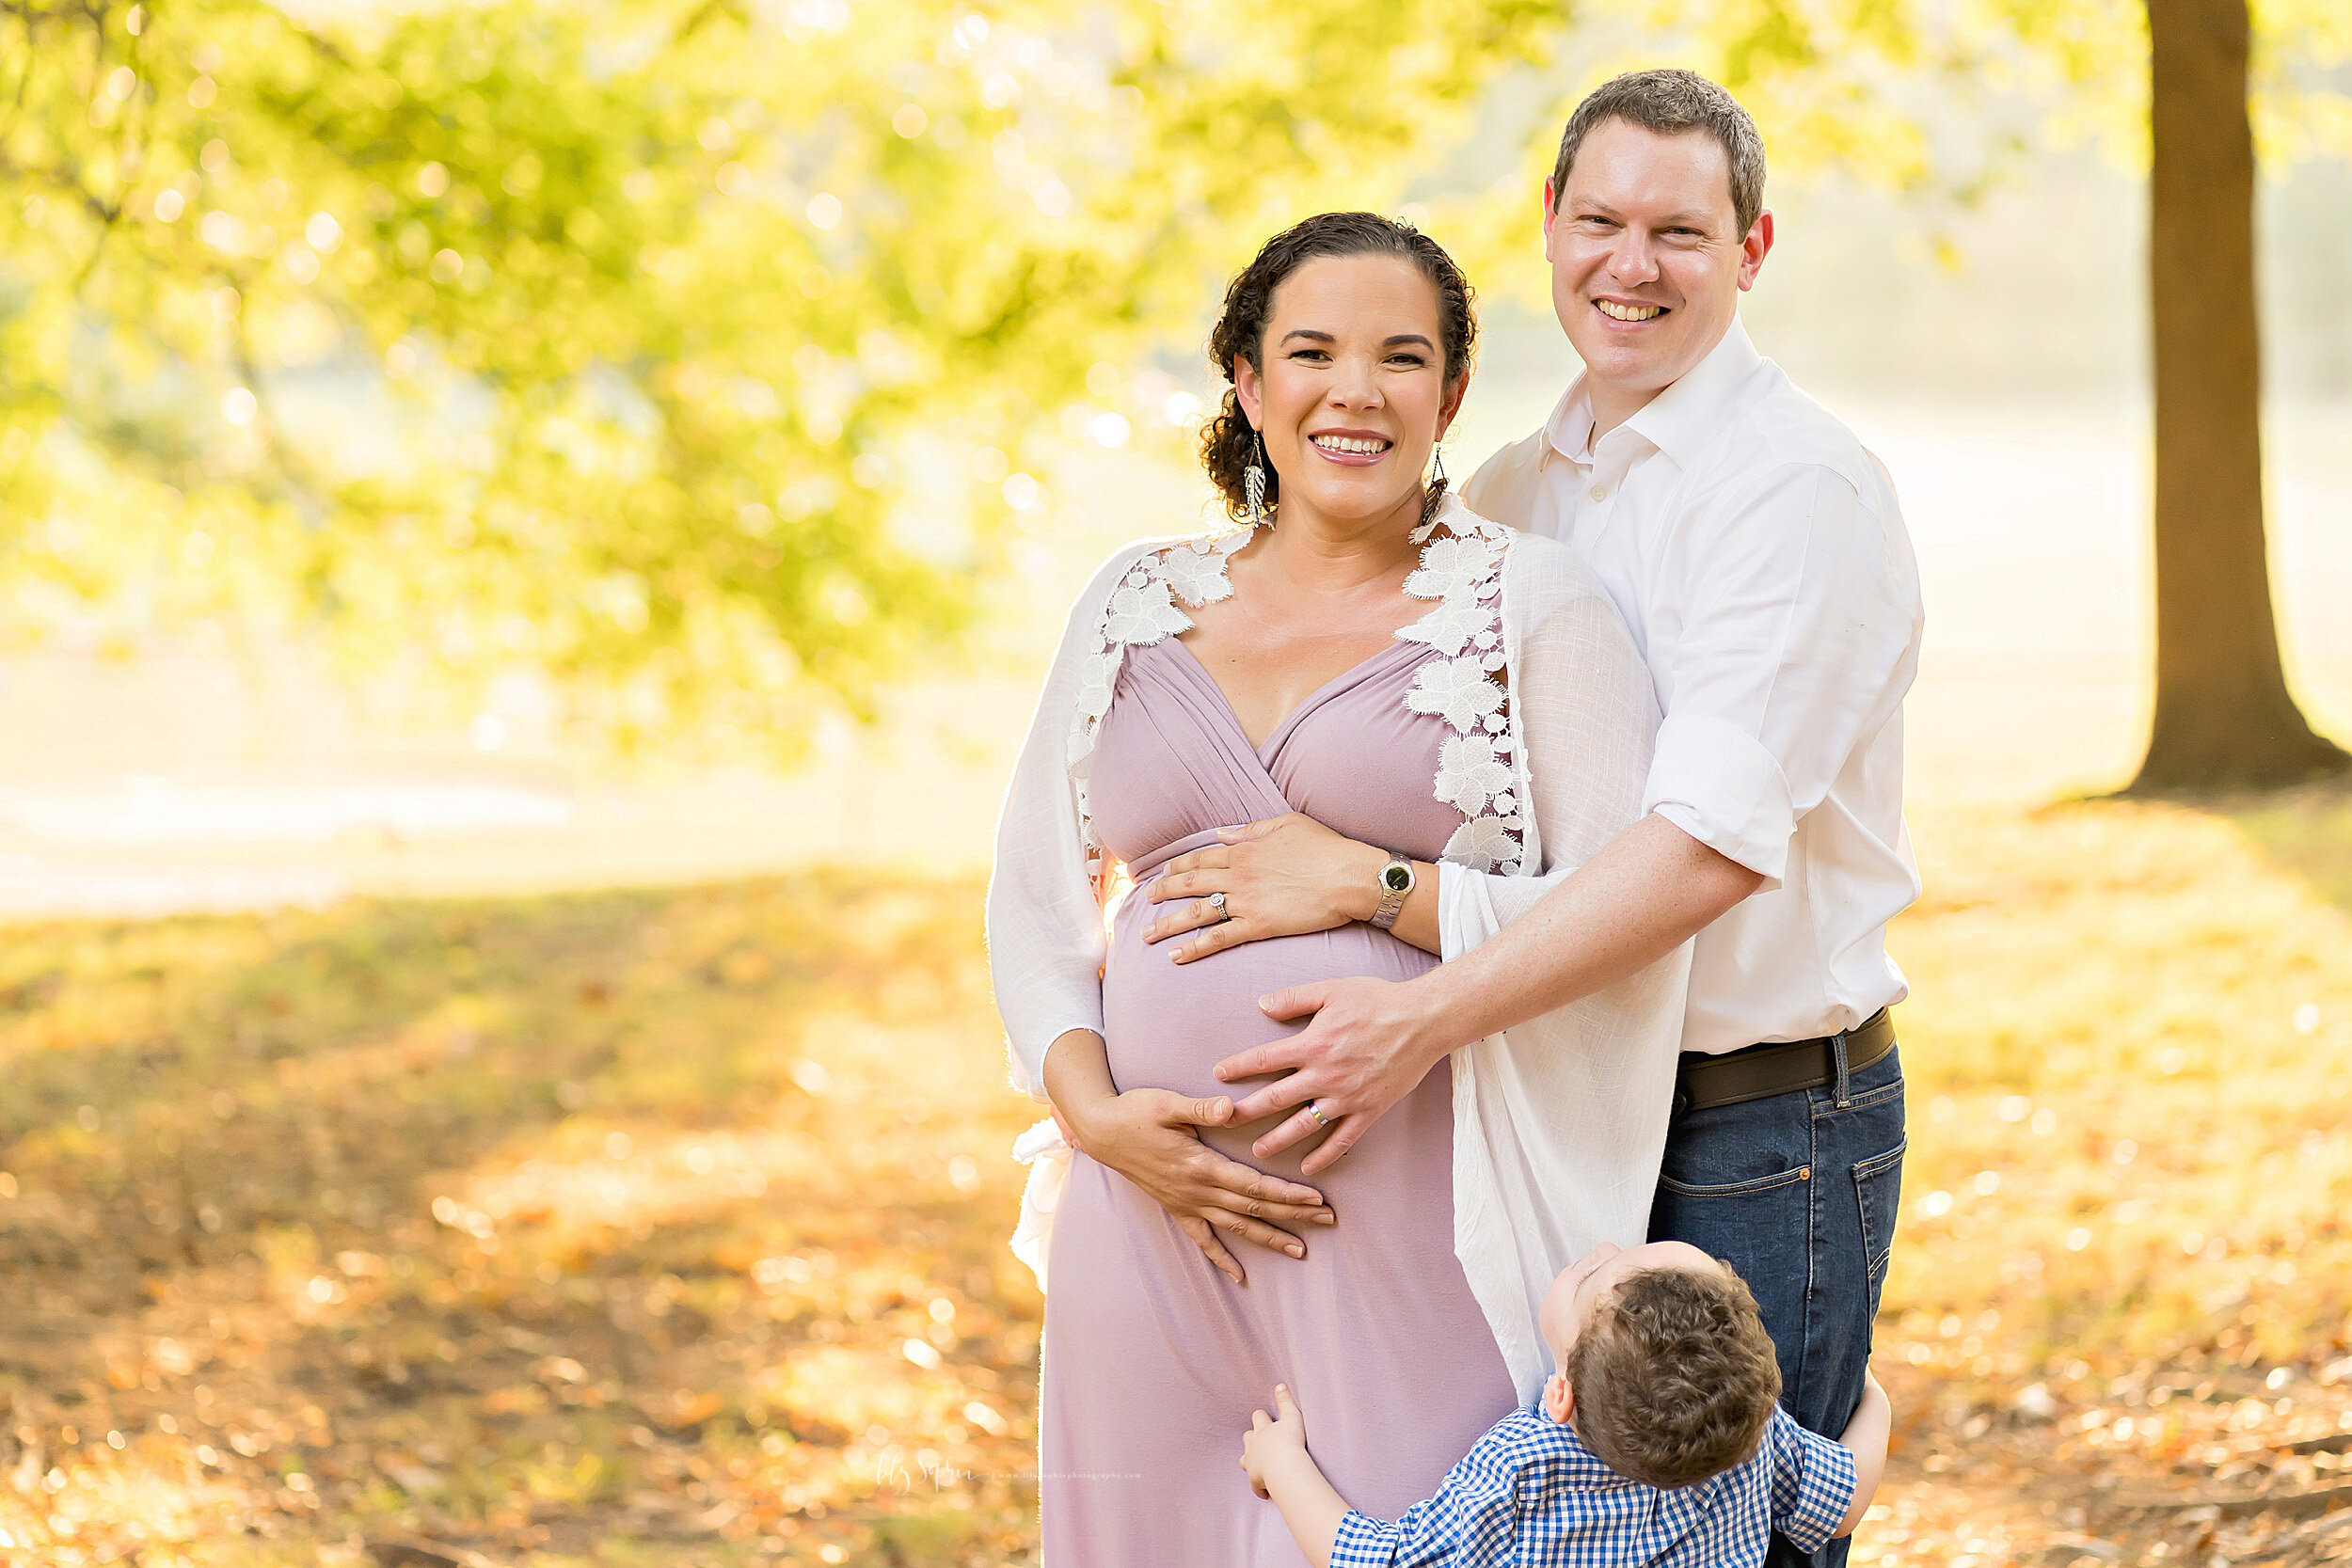 atlanta-decatur-old-fourth-ward-poncey-highlands-candler-park-grant-park-brookhaven-buckhead-virginia-highlands-west-end-decatur-lily-sophia-photography-family-maternity-park-session_2409.jpg